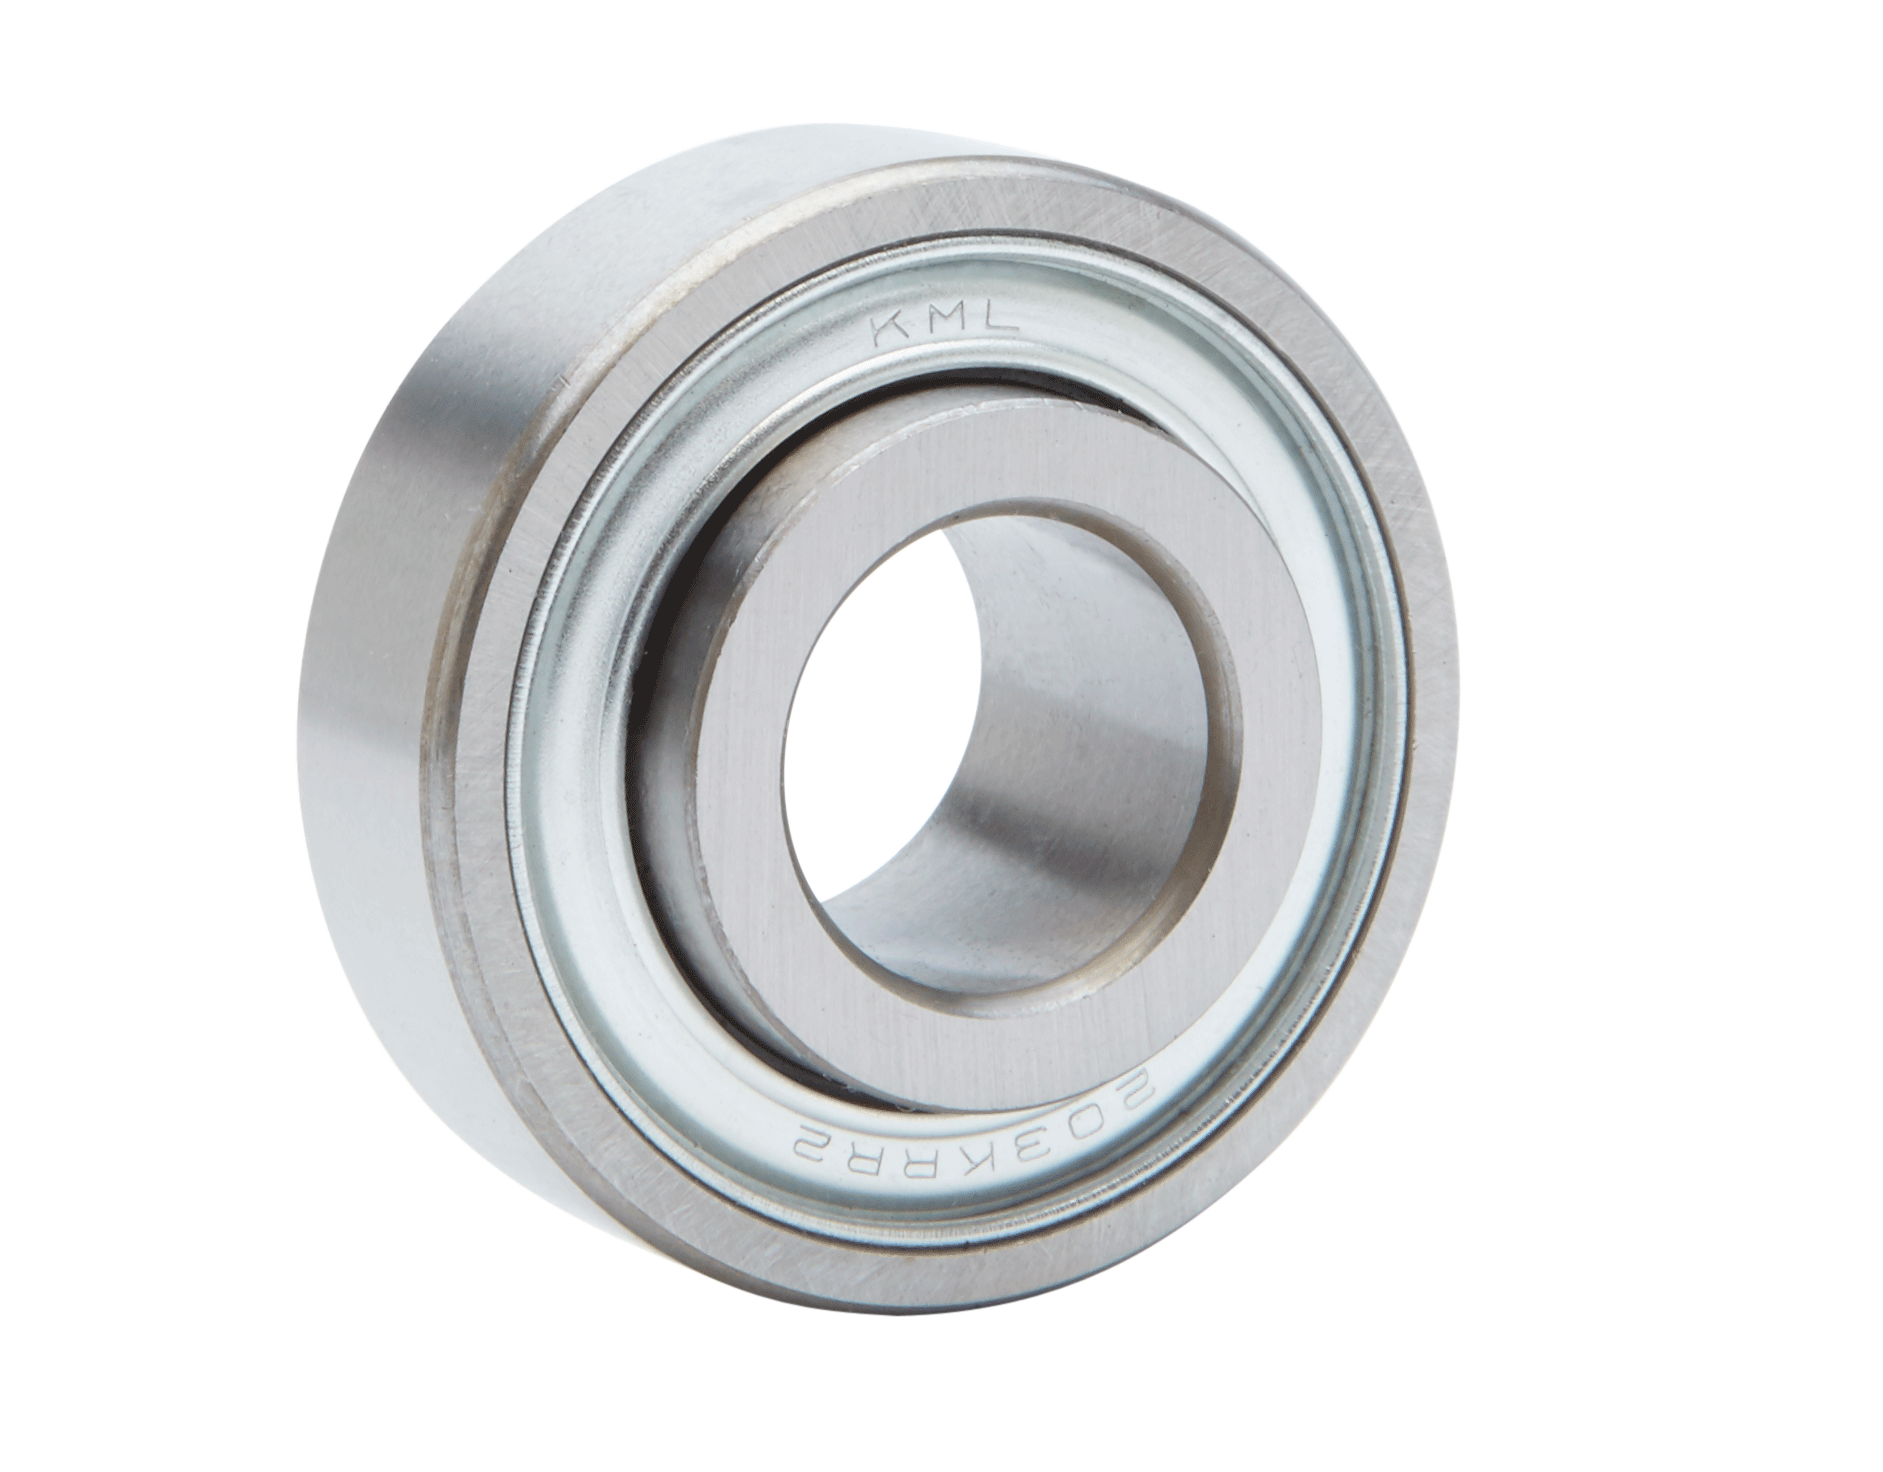 Coast to Coast PWG 1 7/16R Agricultural/Industrial Ball Bearing